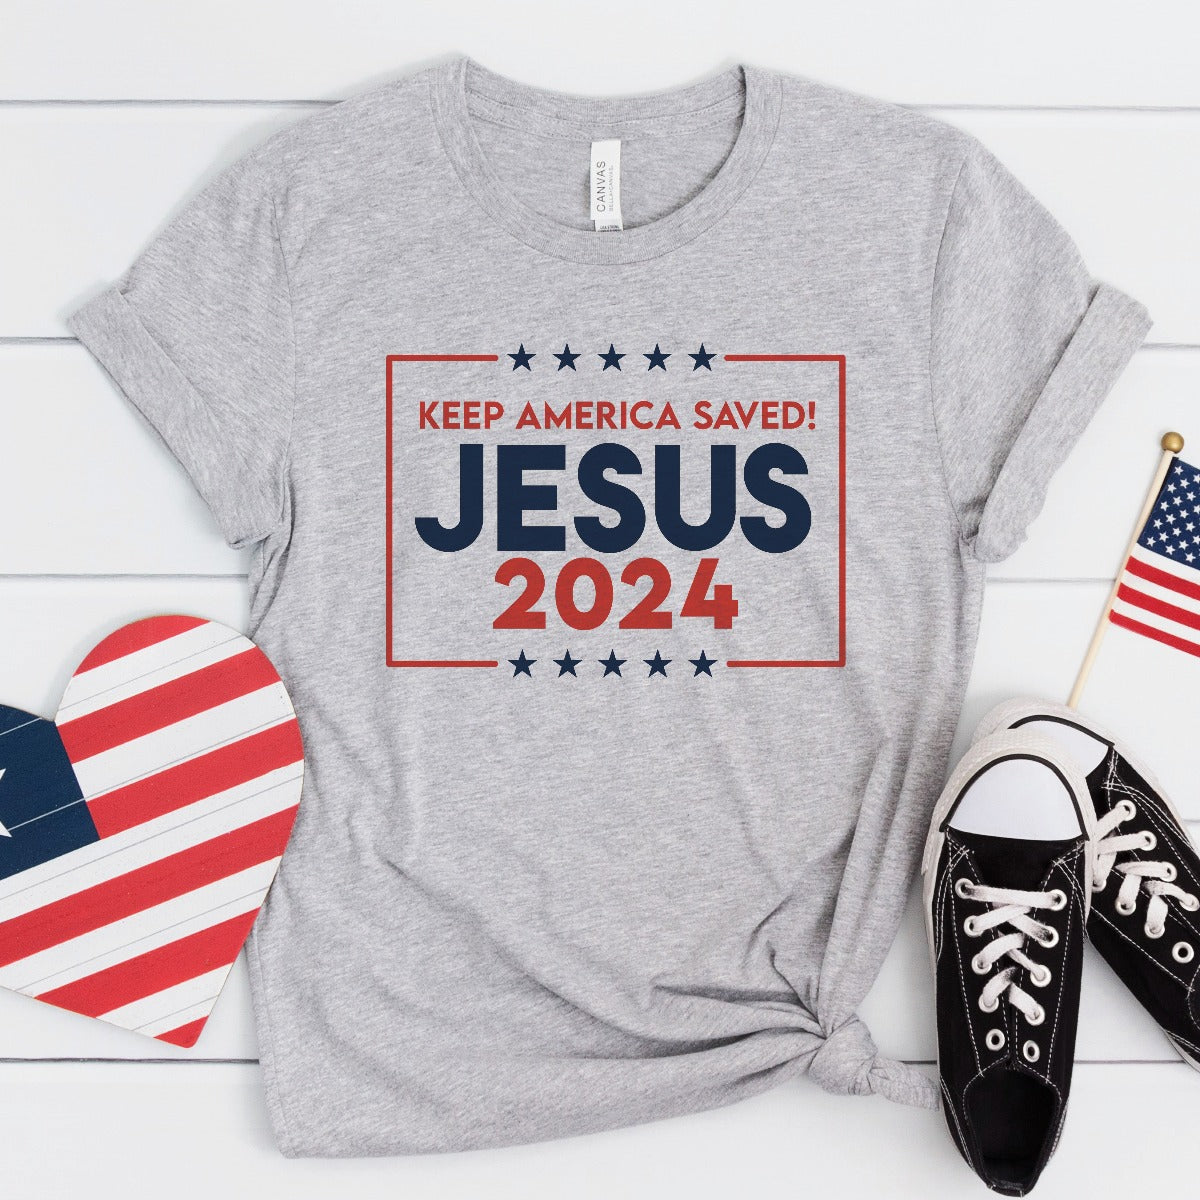 Patriotic athletic heather gray Bella Canvas 3001 Presidential election vote unisex Christian t-shirt with "Jesus 2024 Keep America Saved" printed in bold red, white, and blue fonts, tees made in the USA for men and women God & Country Patriots